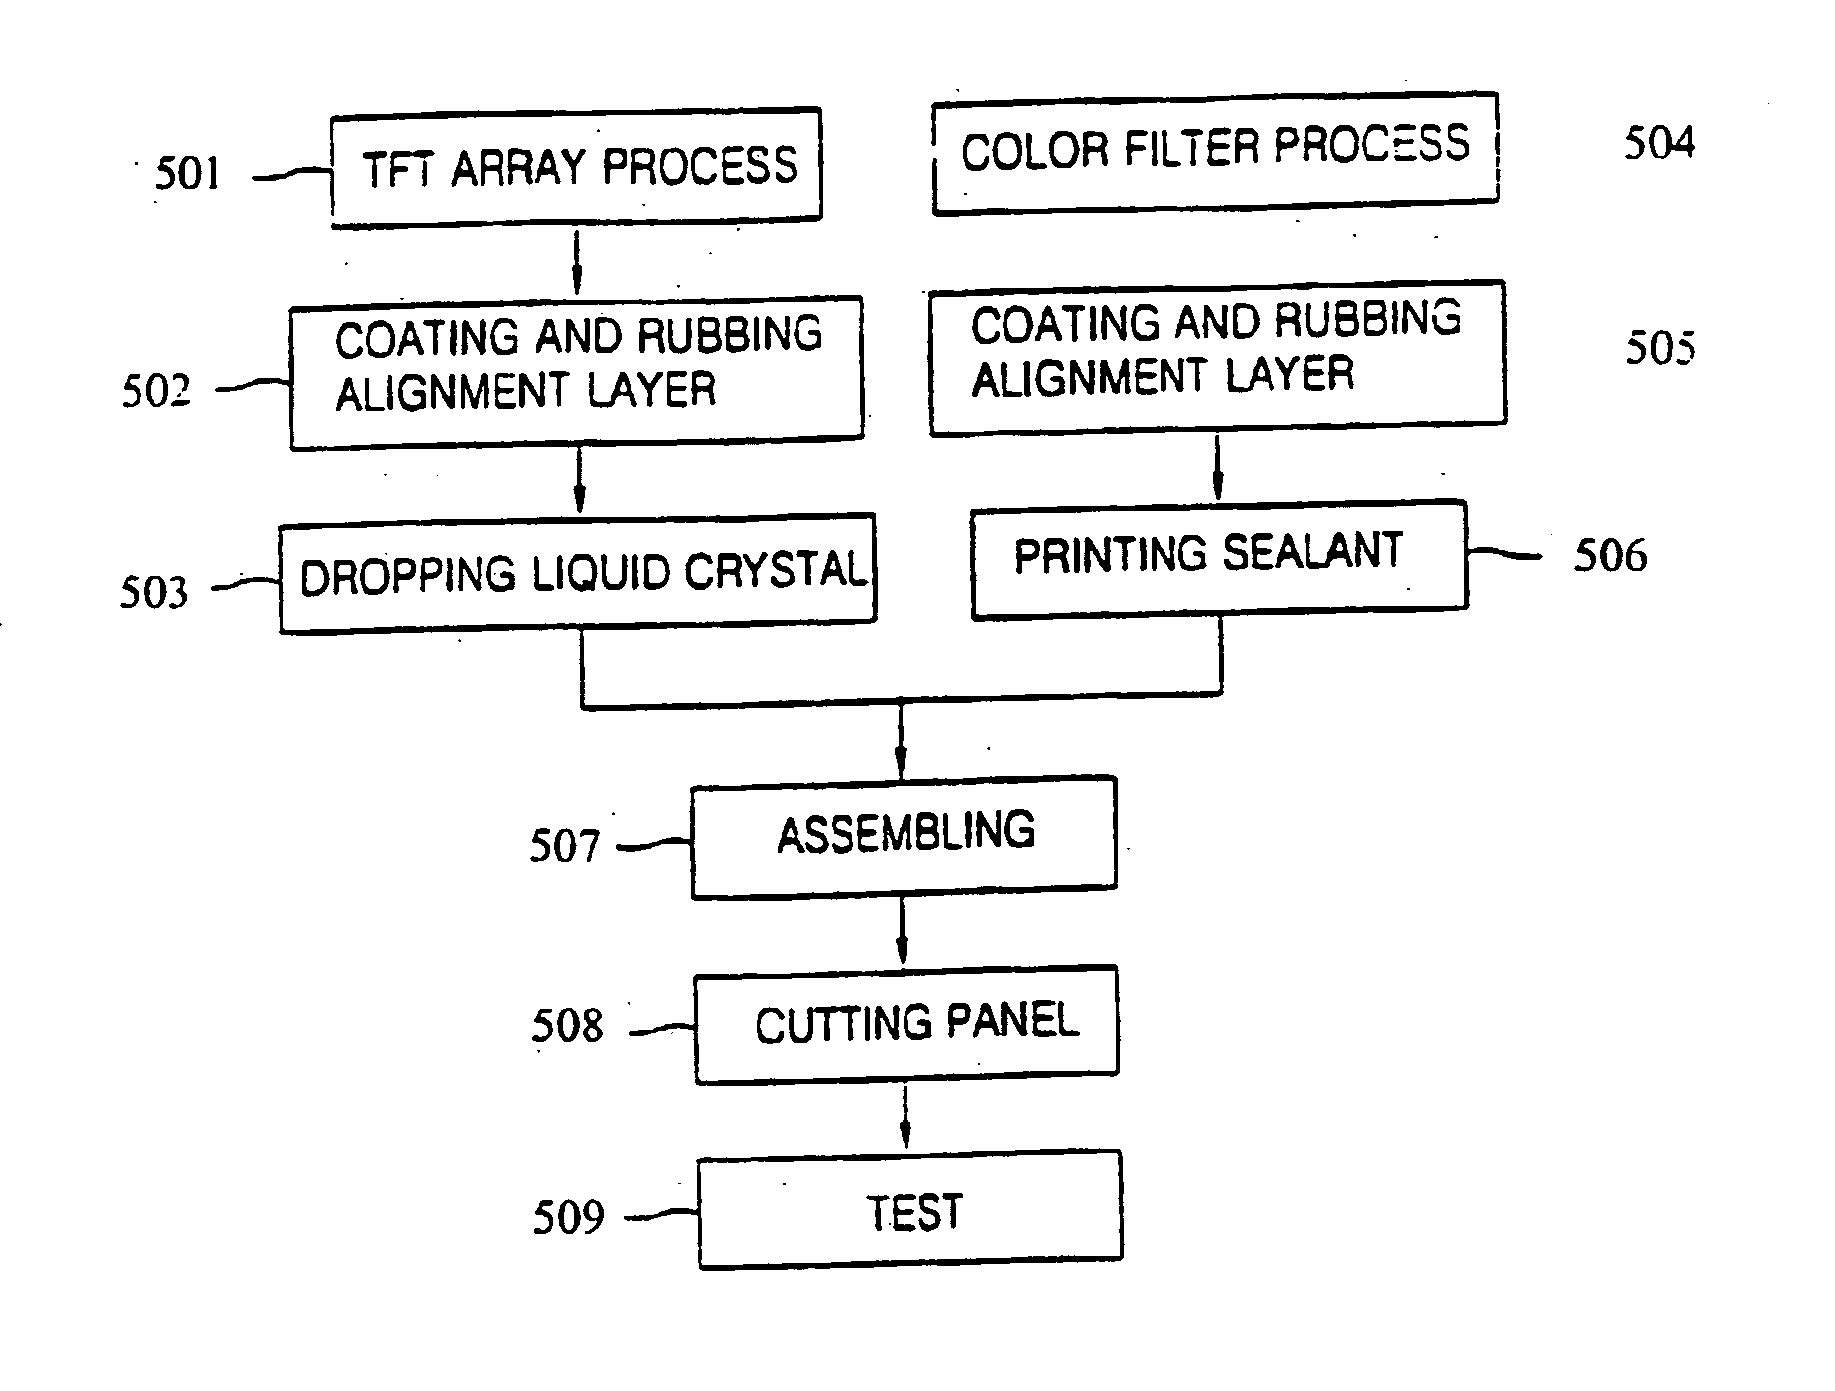 System and method for manufacturing liquid crystal display devices